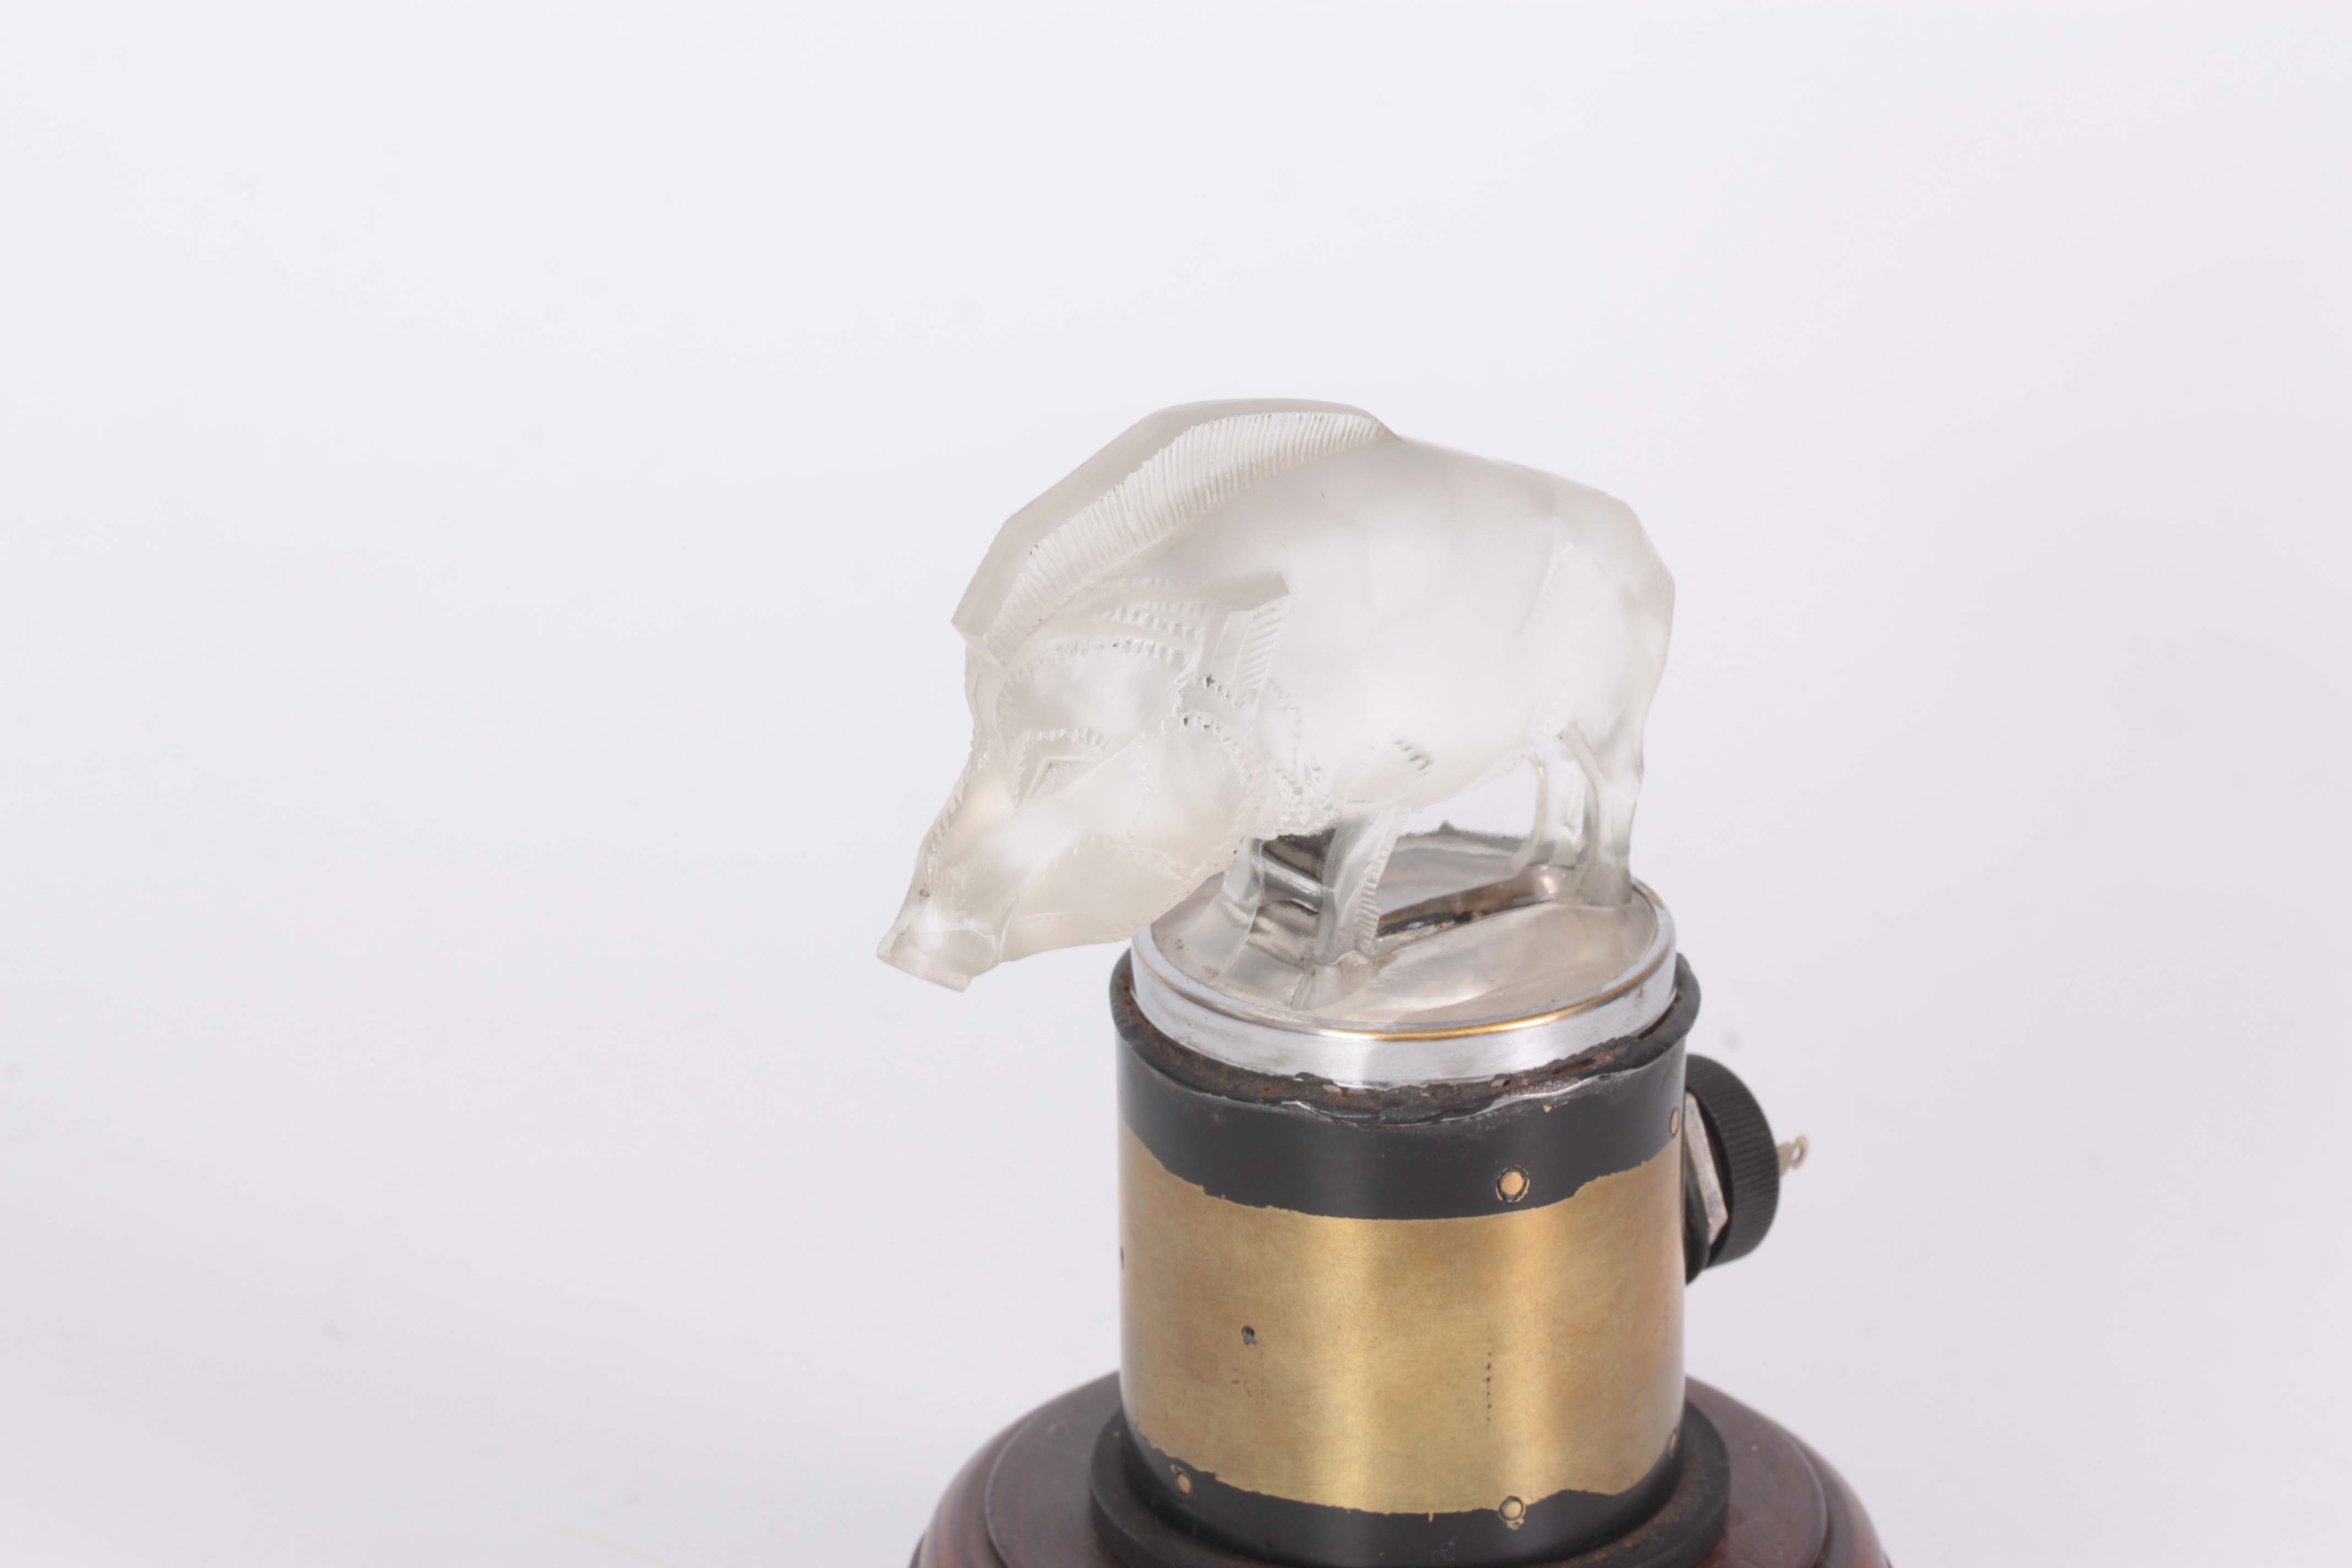 R LALIQUE A CLEAR GLASS BOAR 'SANGLIER' CAR MASCOT mounted on the original illuminated radiator - Image 3 of 5